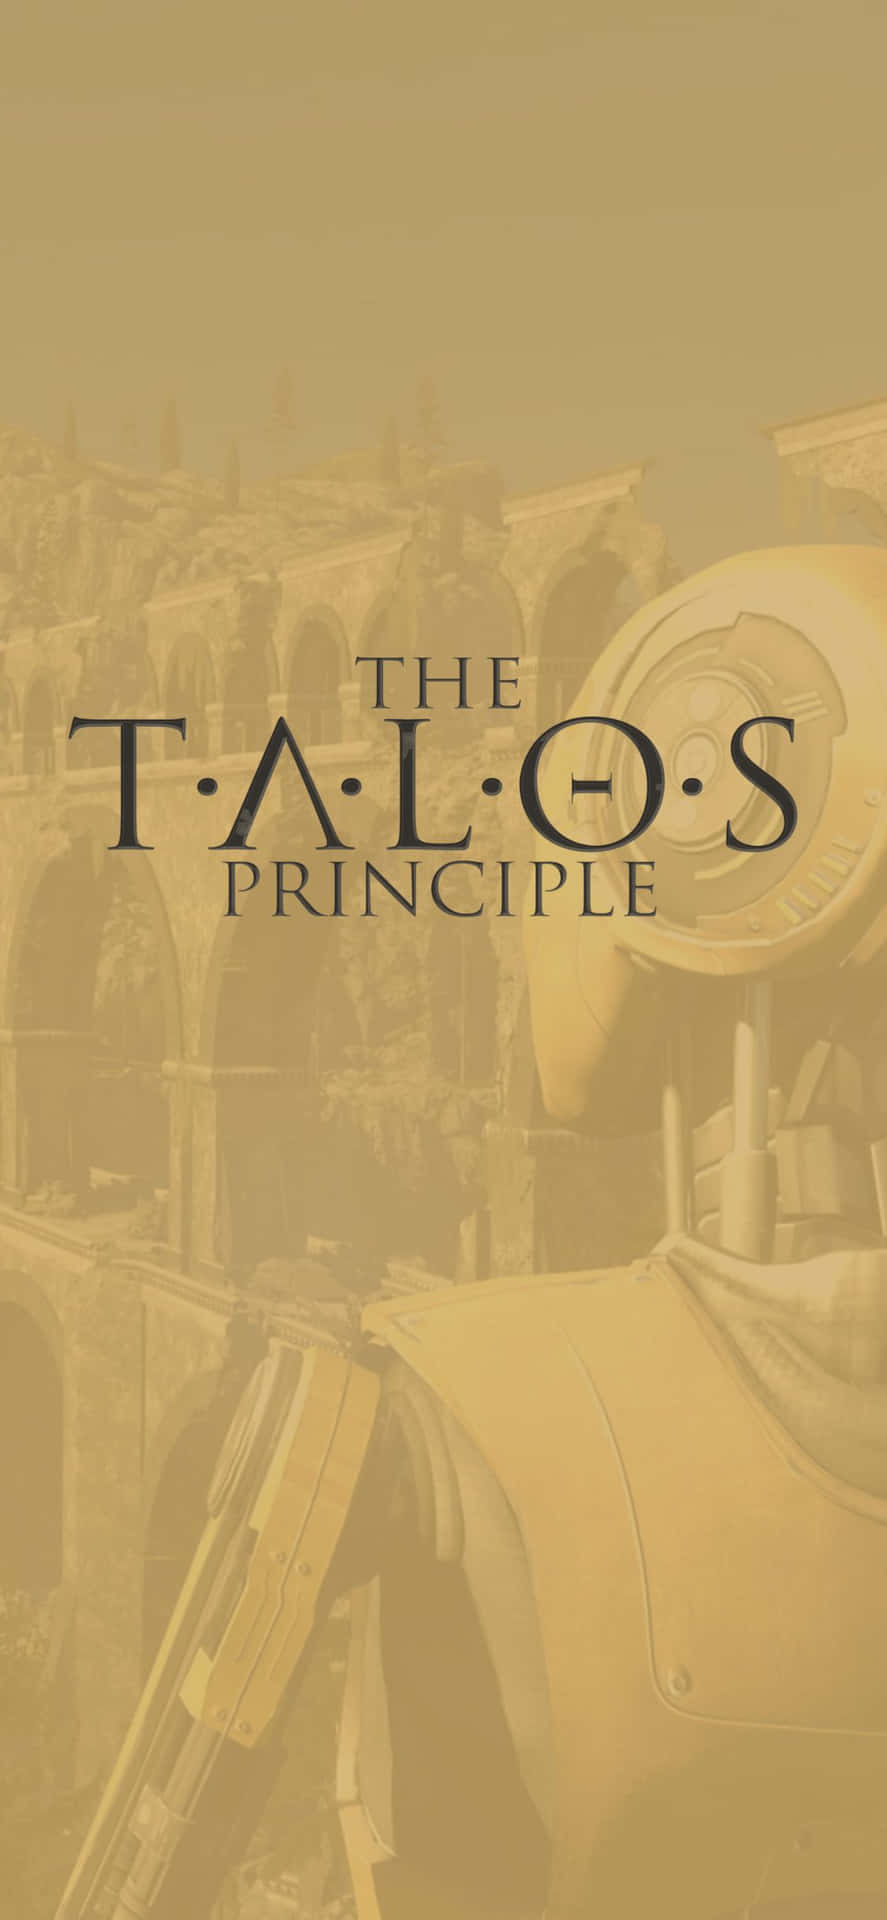 Immerse Yourself In The Exciting World Of "The Talos Principle"